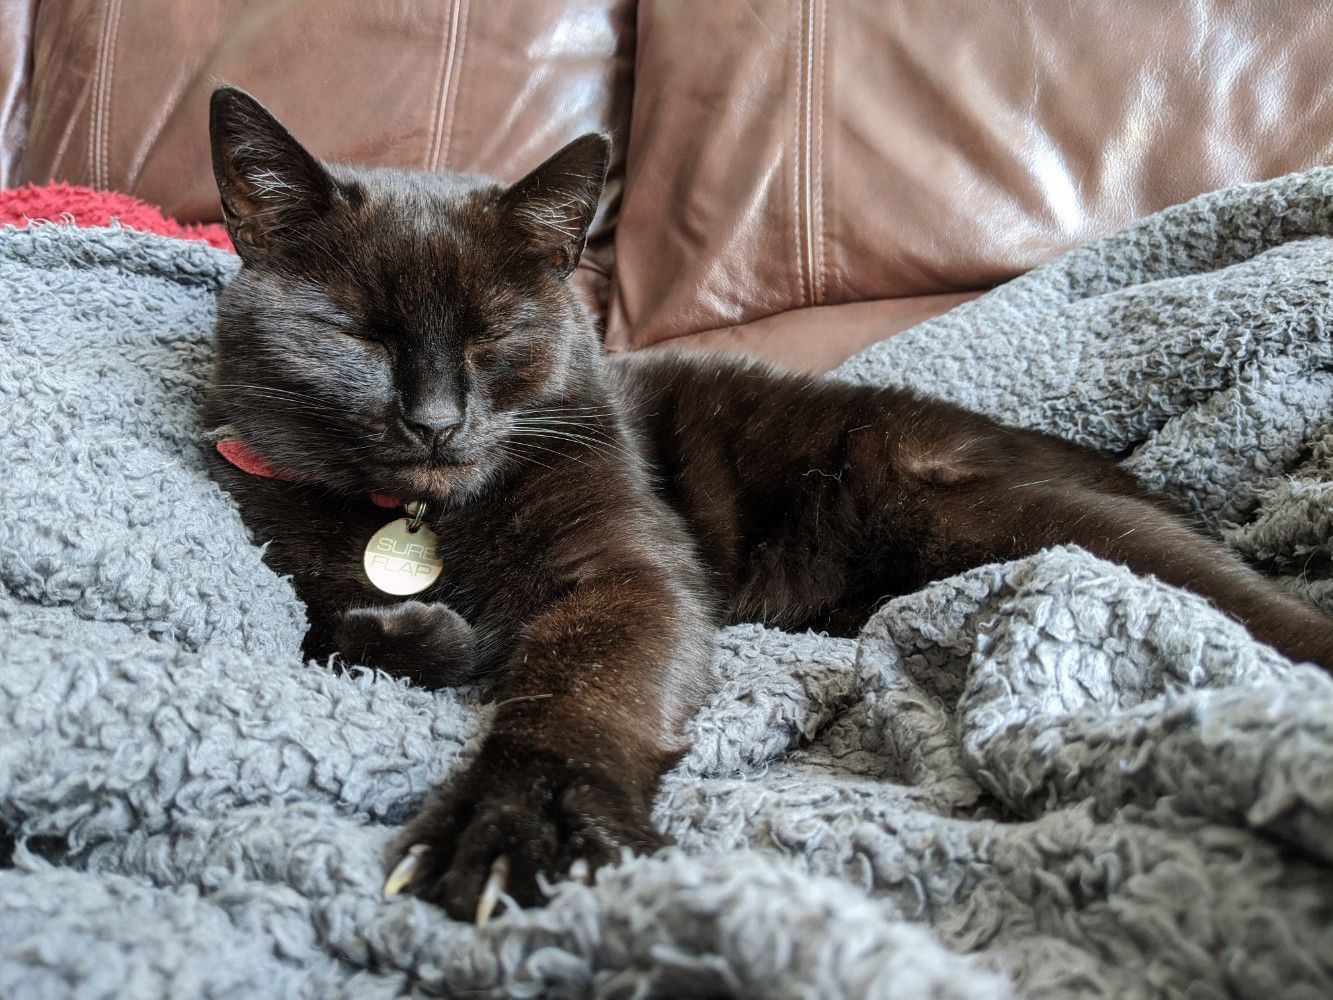 Black cat sitting up on a grey blanket, with eyes closed, looking very sleepy